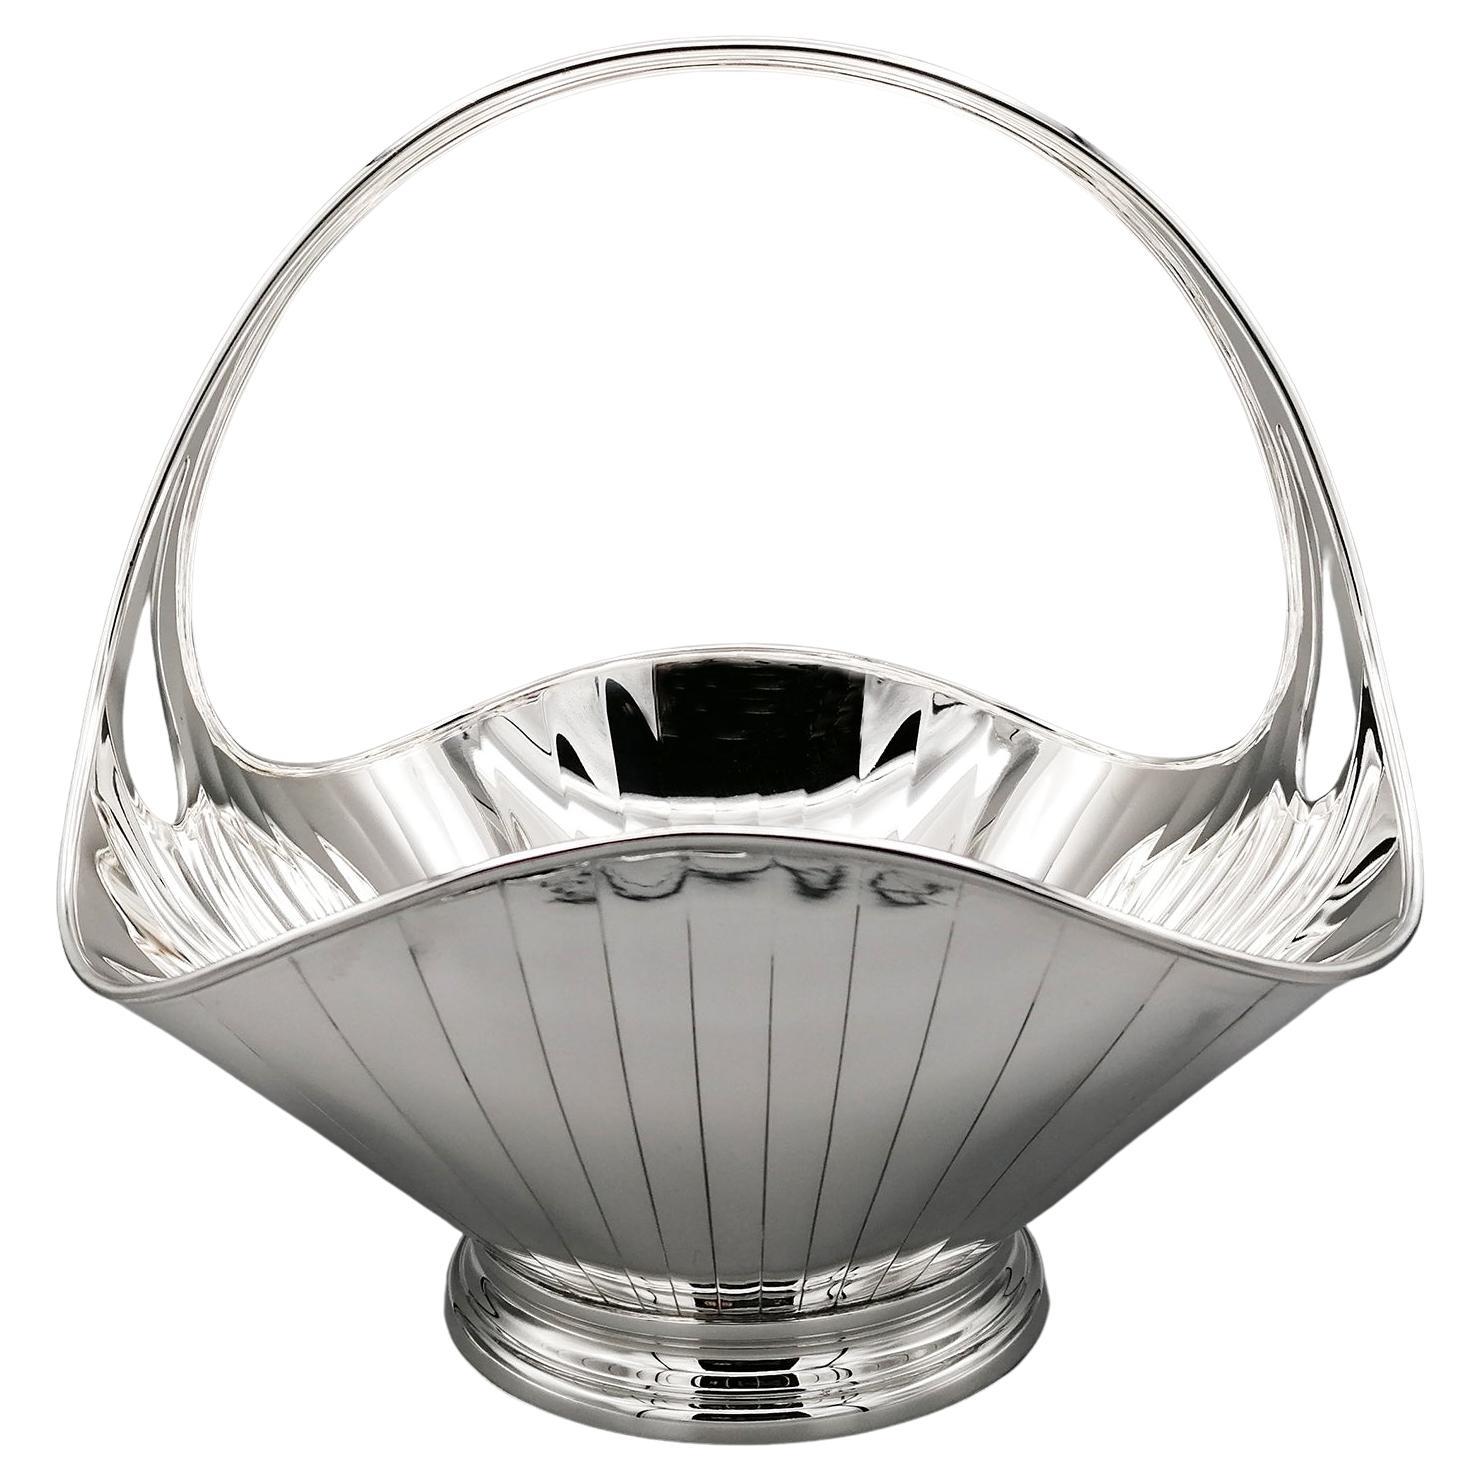 21° Century Italian Sterling Silver Basket with Handle